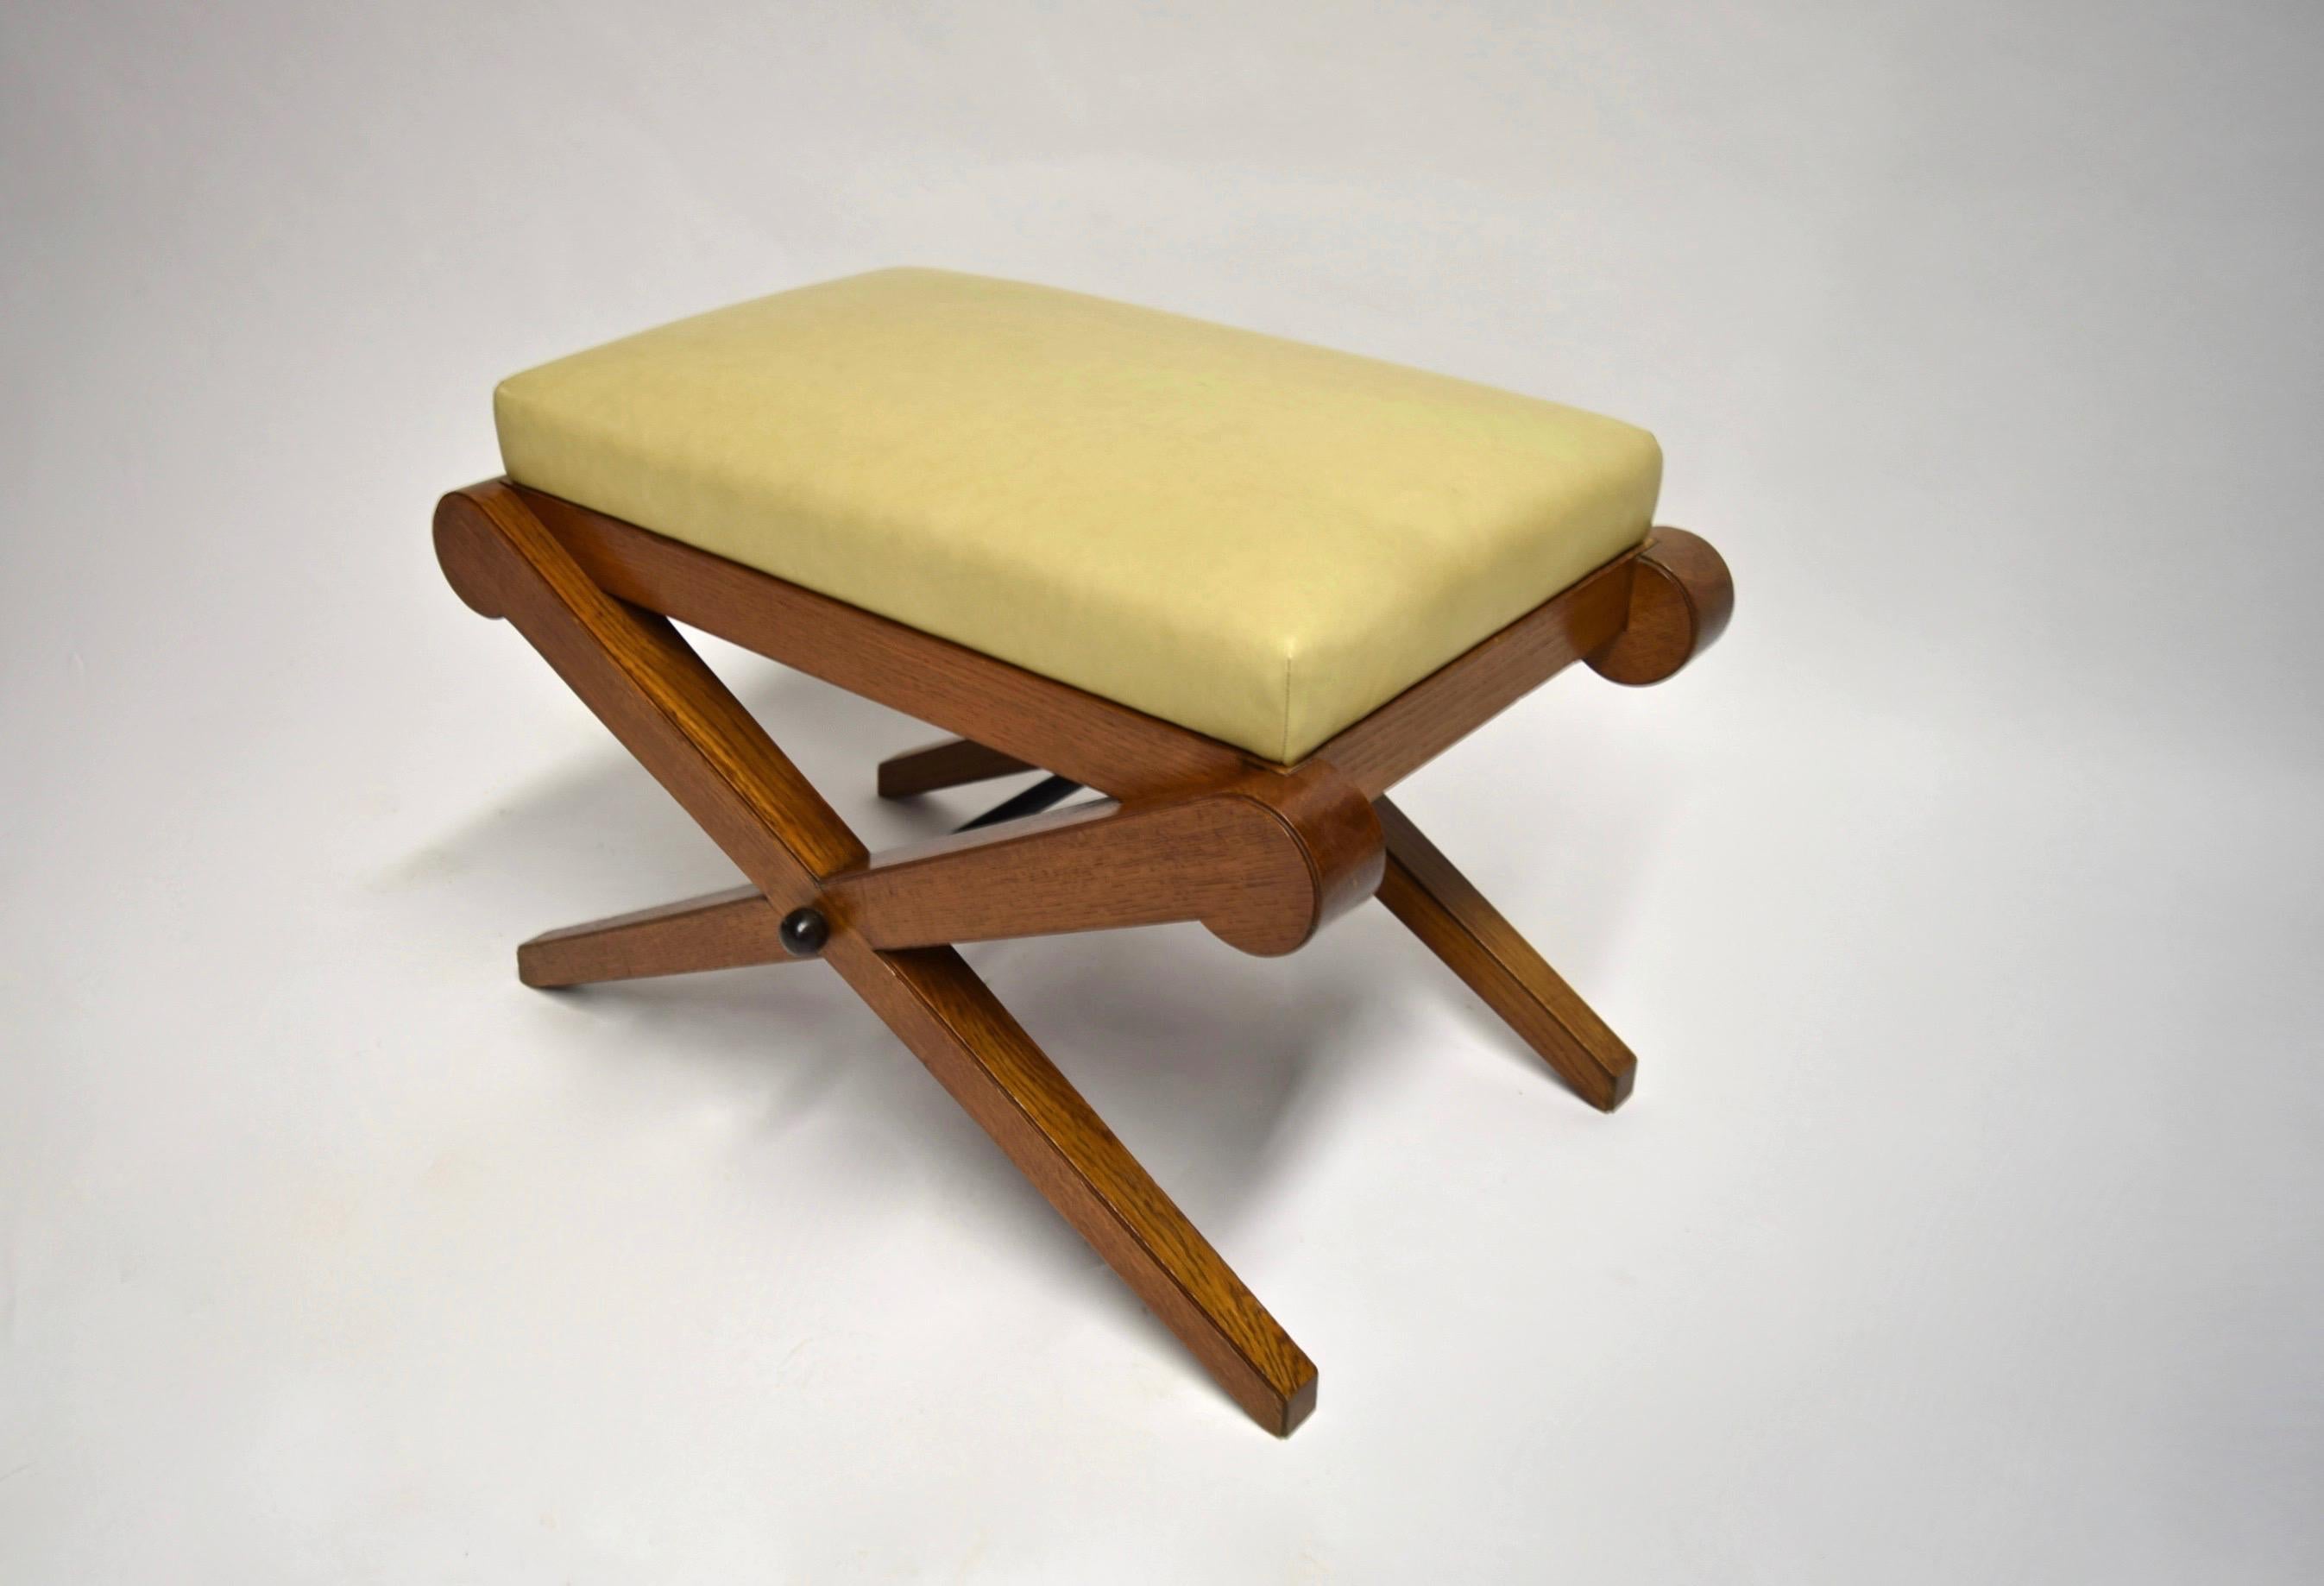 French Deco Bench / Footstool, circa 1930 Made in France In Excellent Condition For Sale In Jersey City, NJ